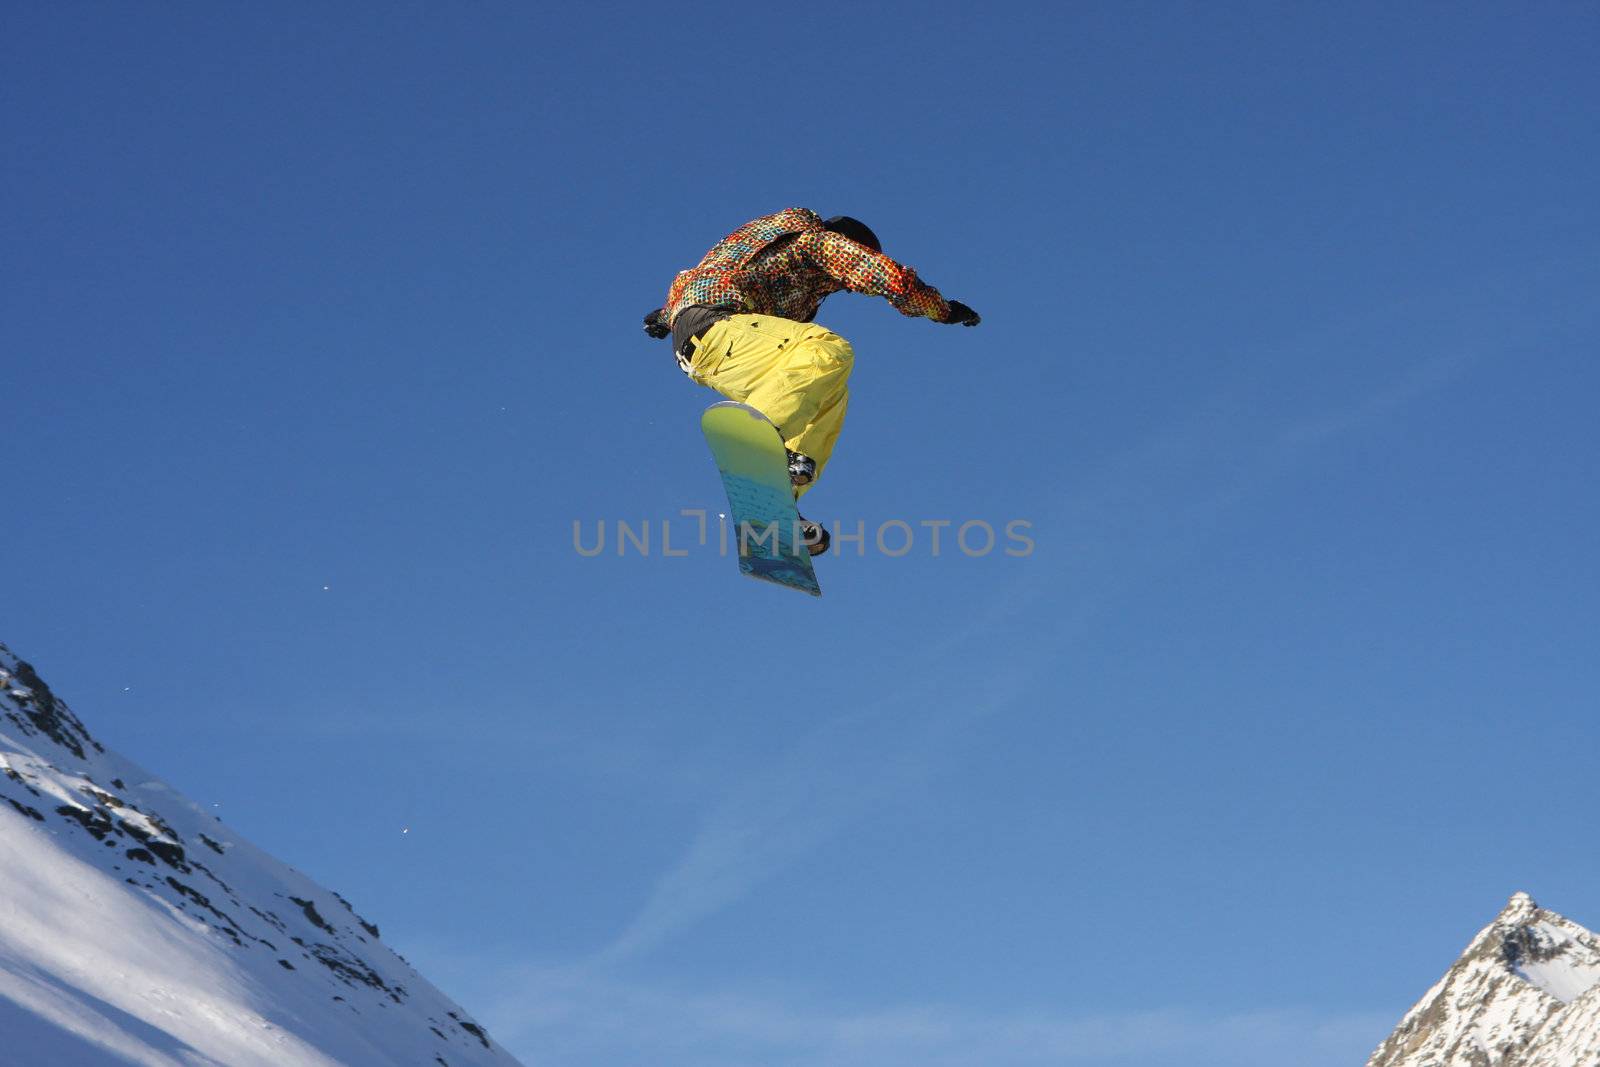 Snowboarder jumping high in the air by monner